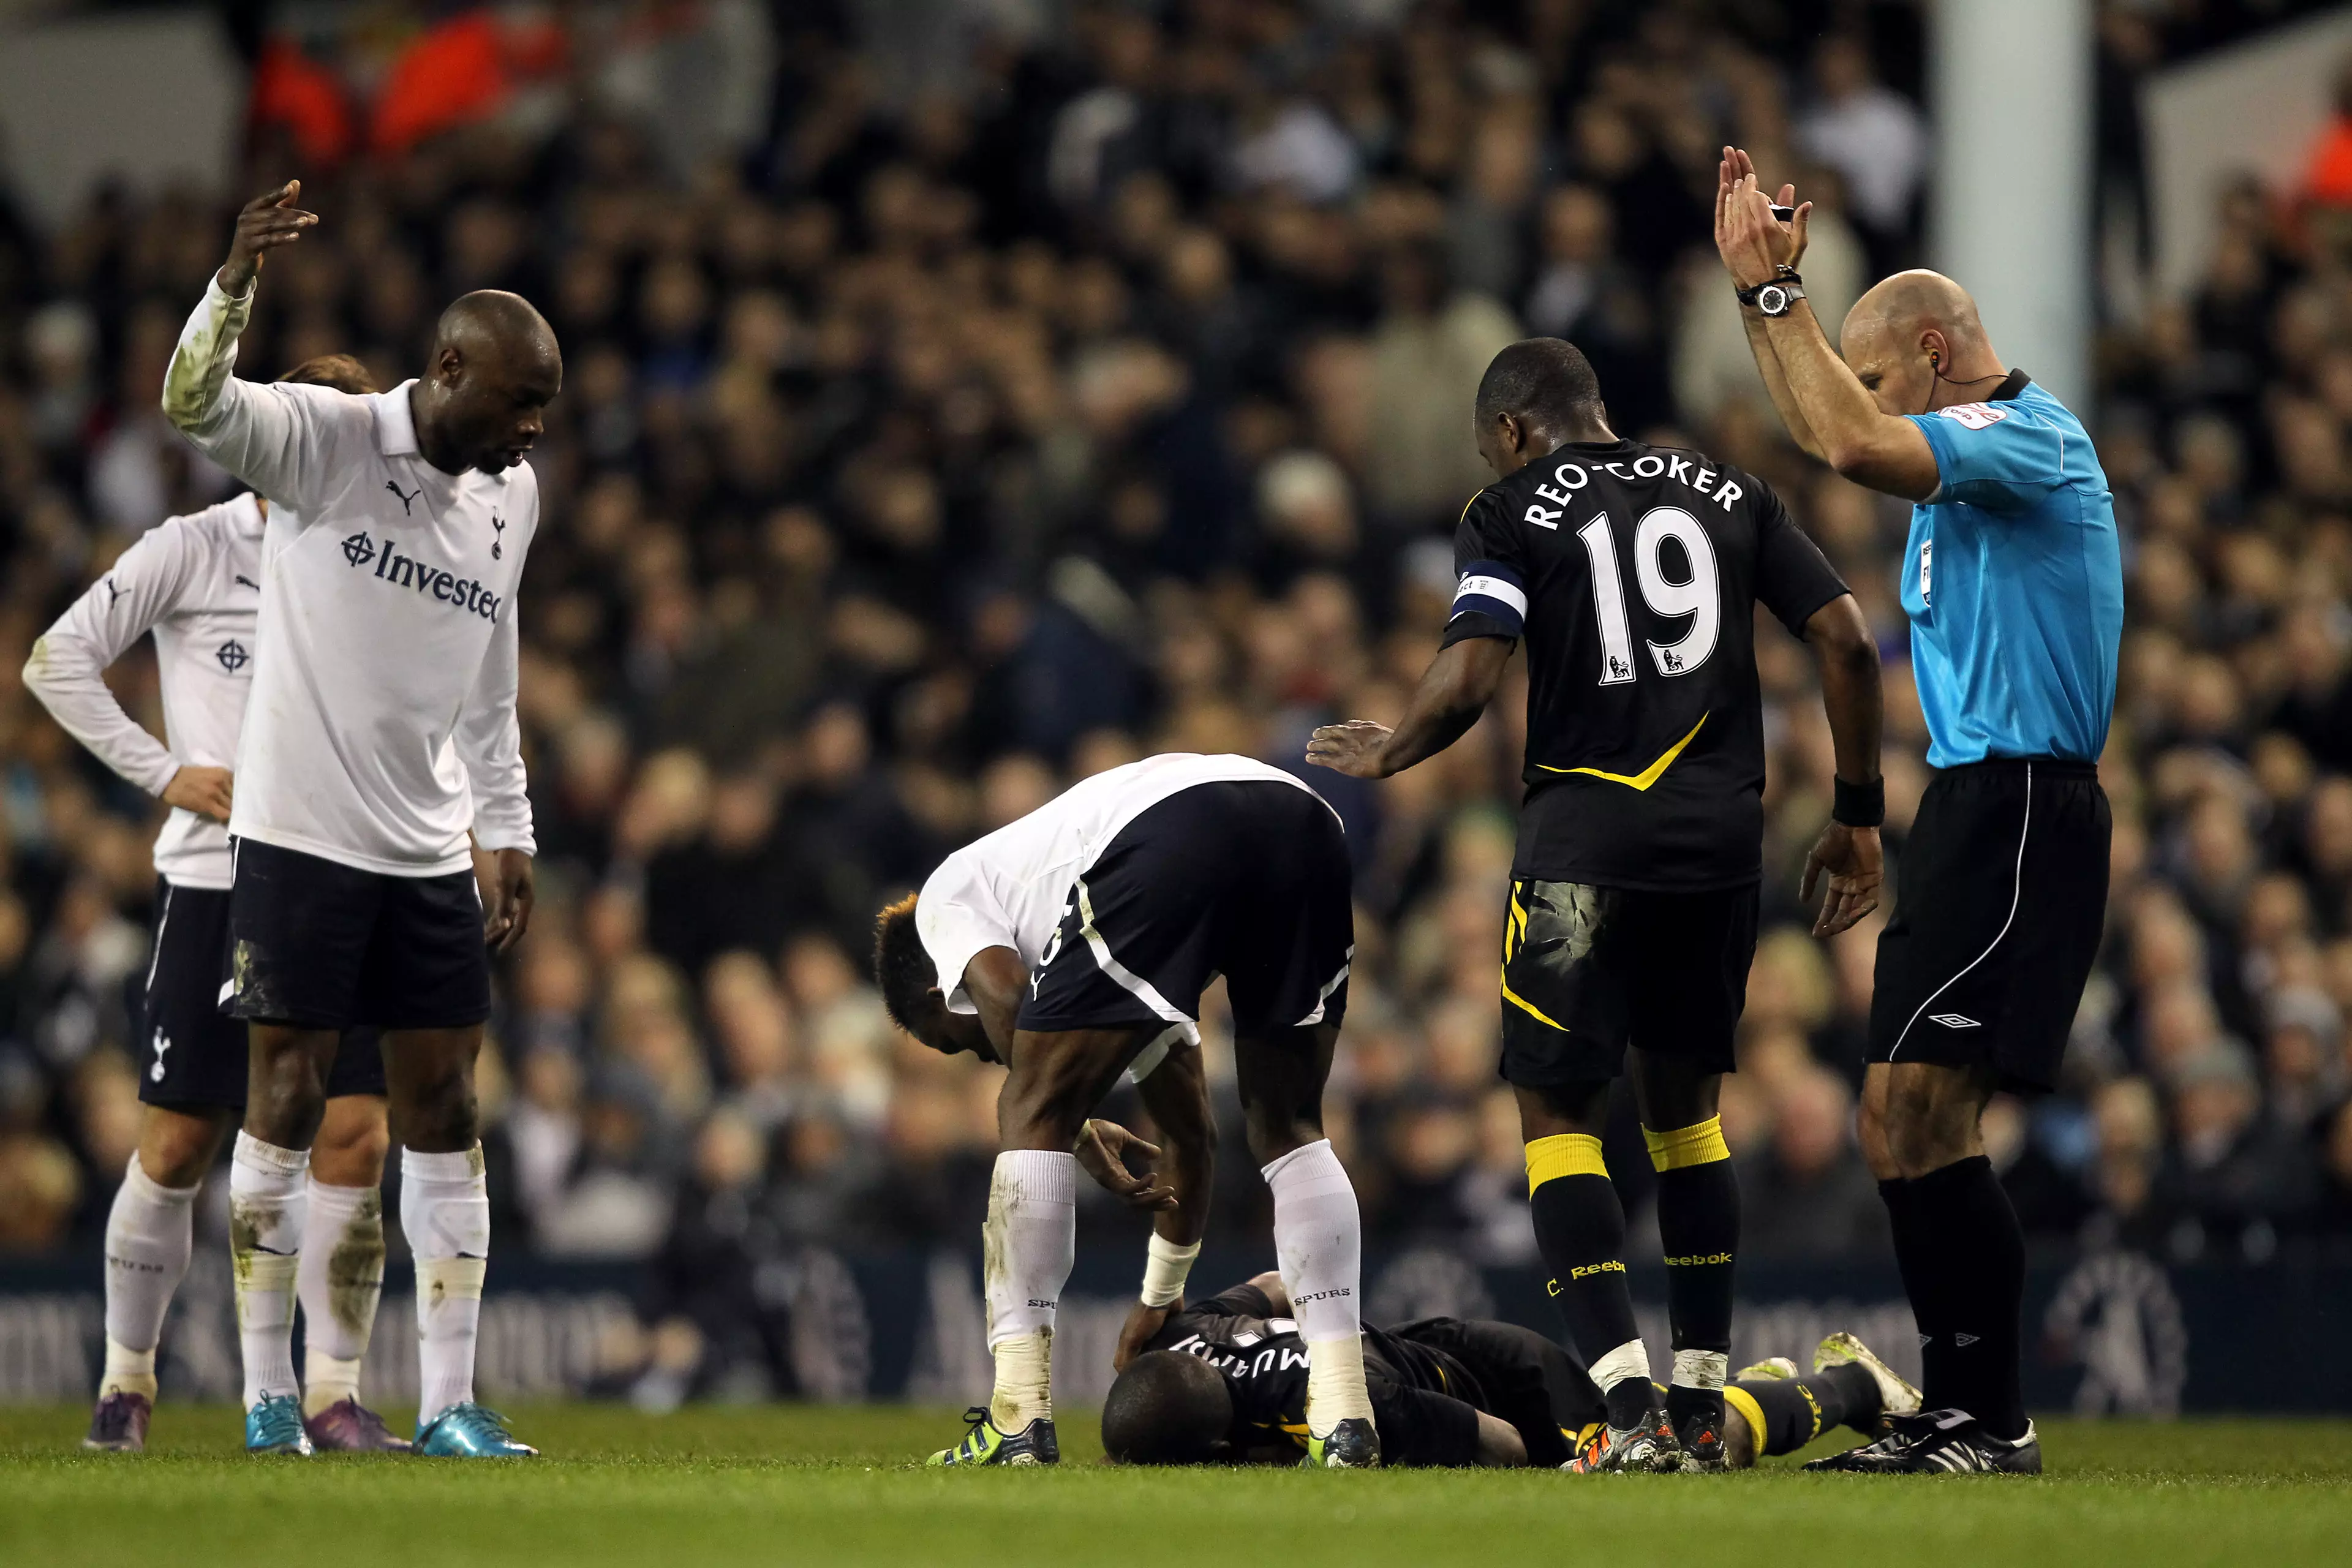 Muamba was lucky to survive.